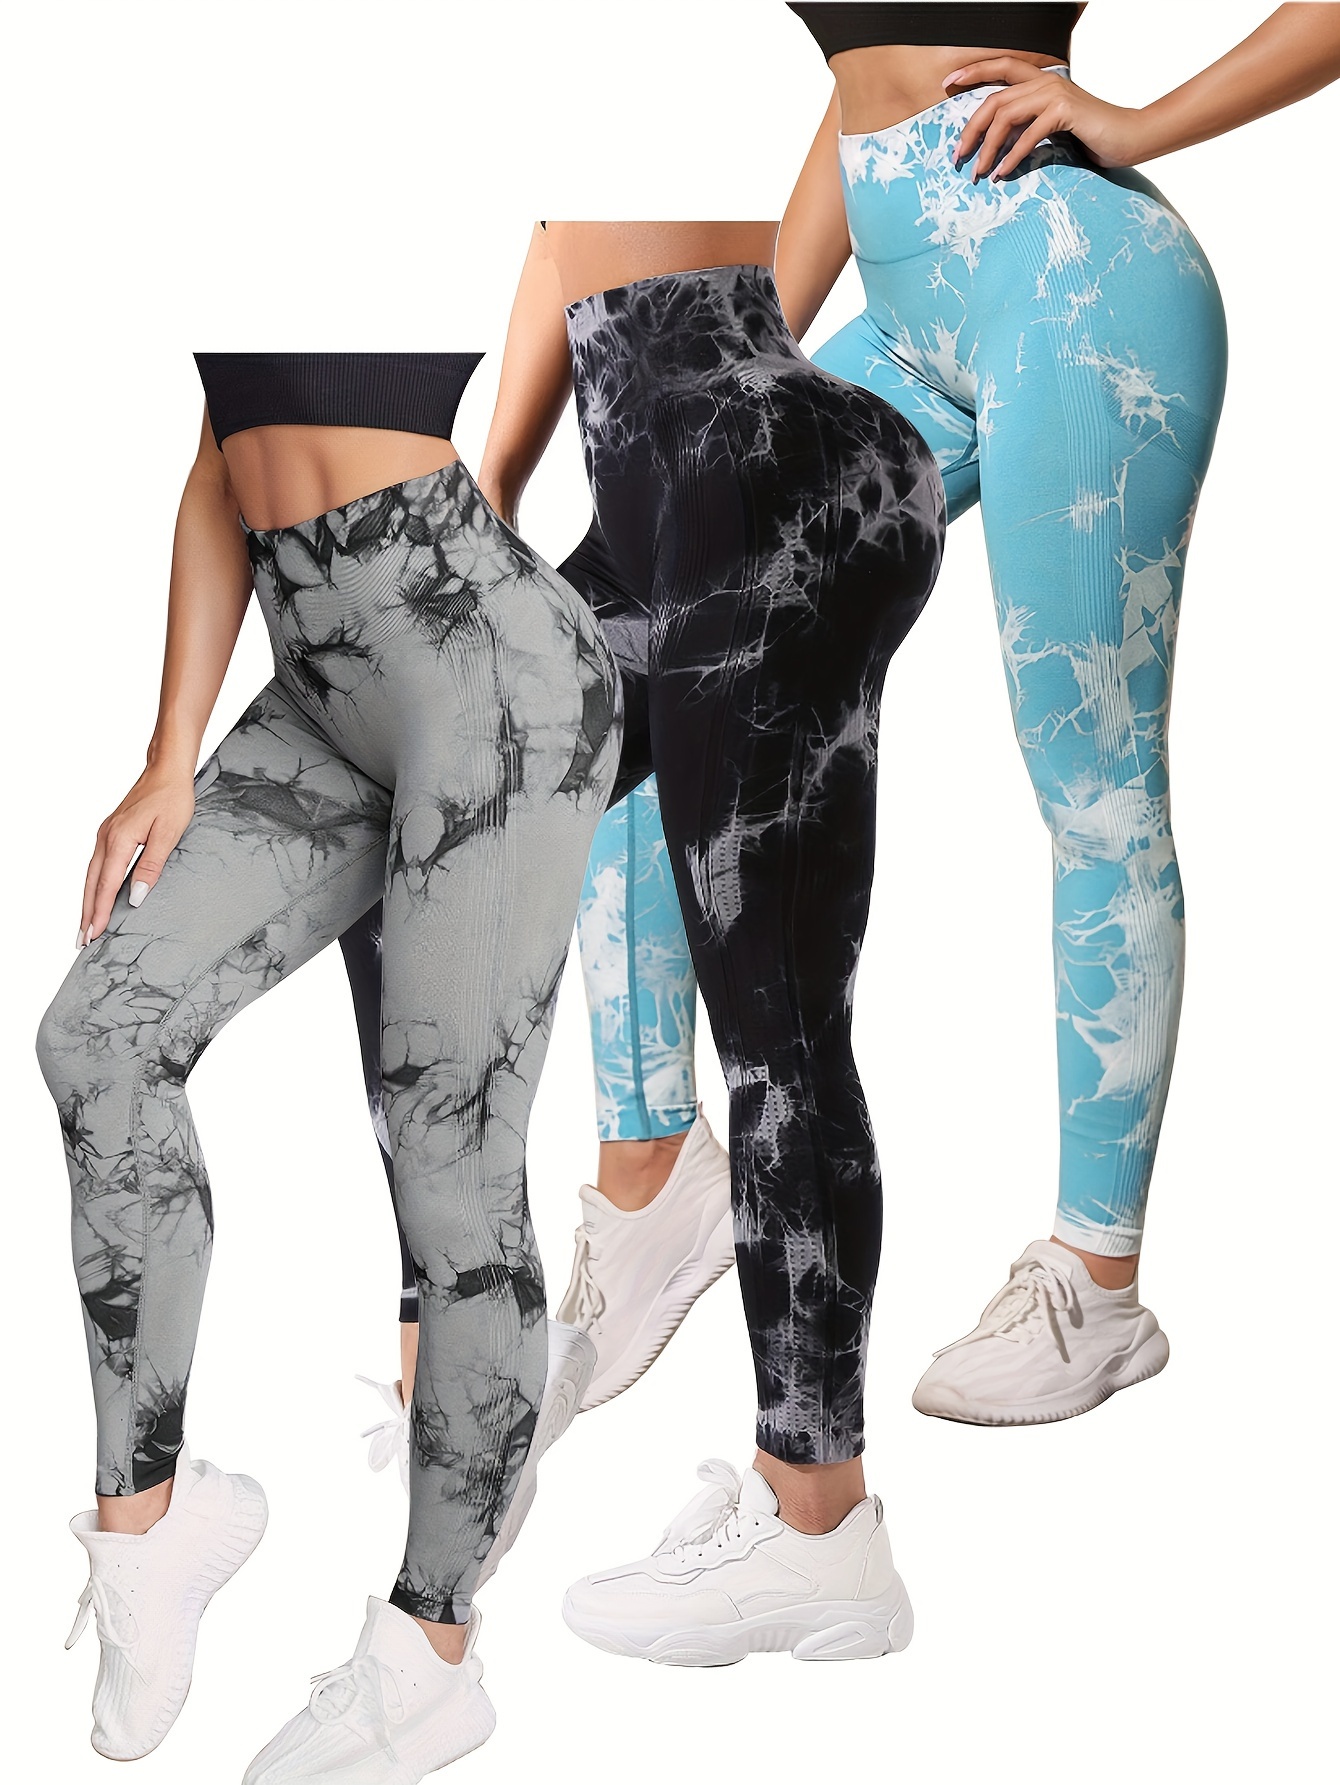 Girls' (big) Athletic Wear For Four Seasons With Seamless Tie Dye Leggings,  Suitable For Yoga, Pilates, Running And Outdoor Activities